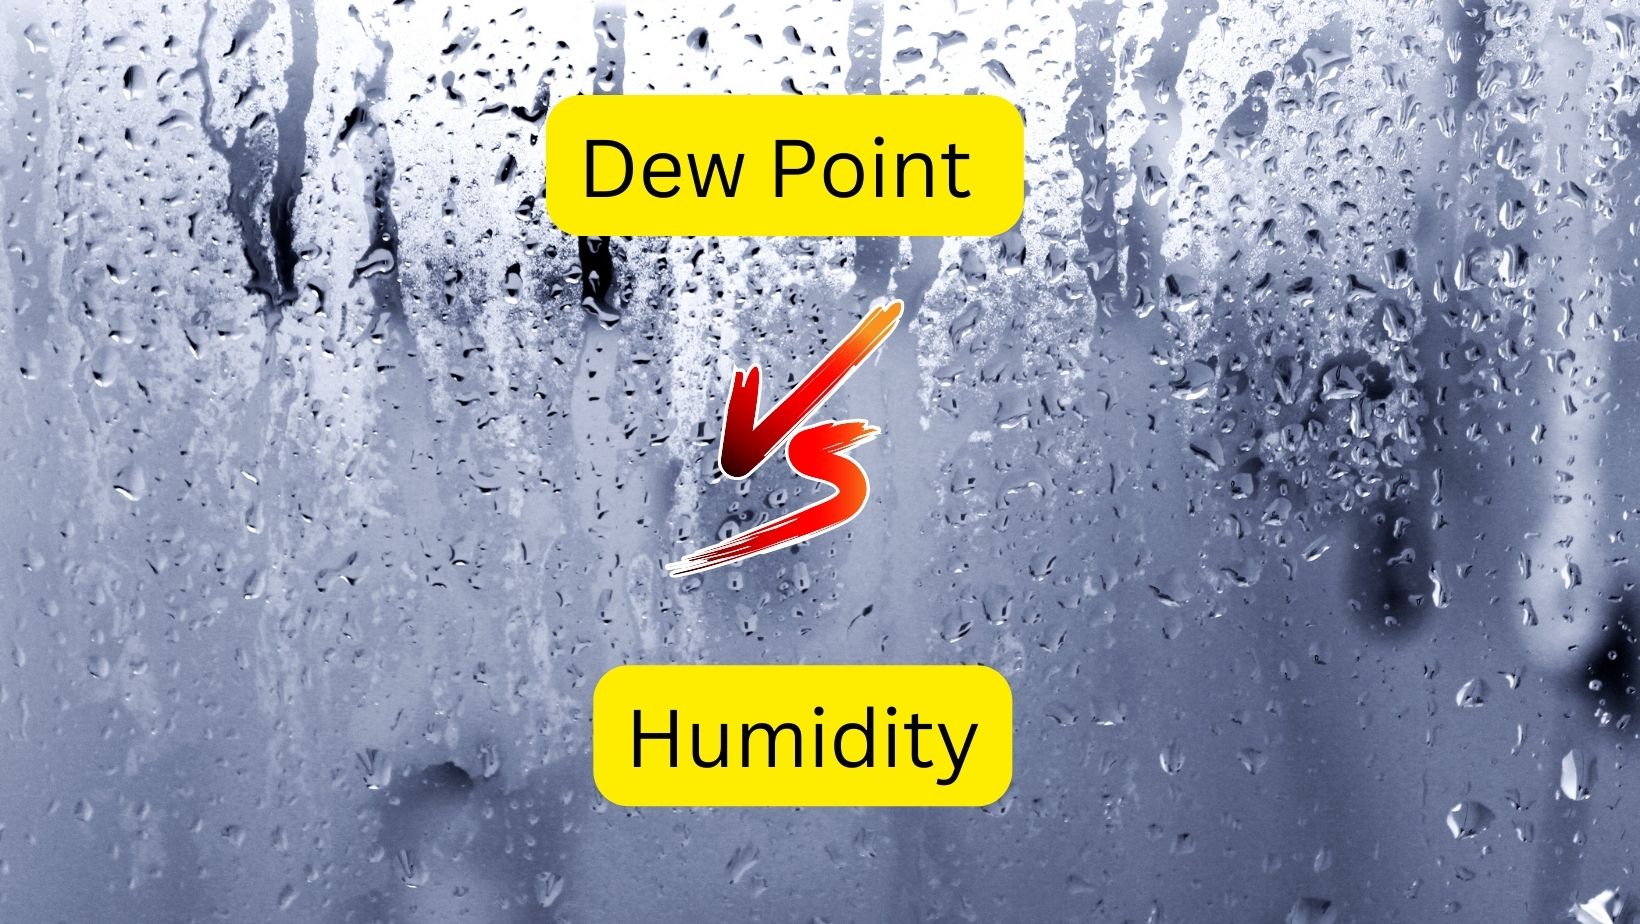 What is Dew Point